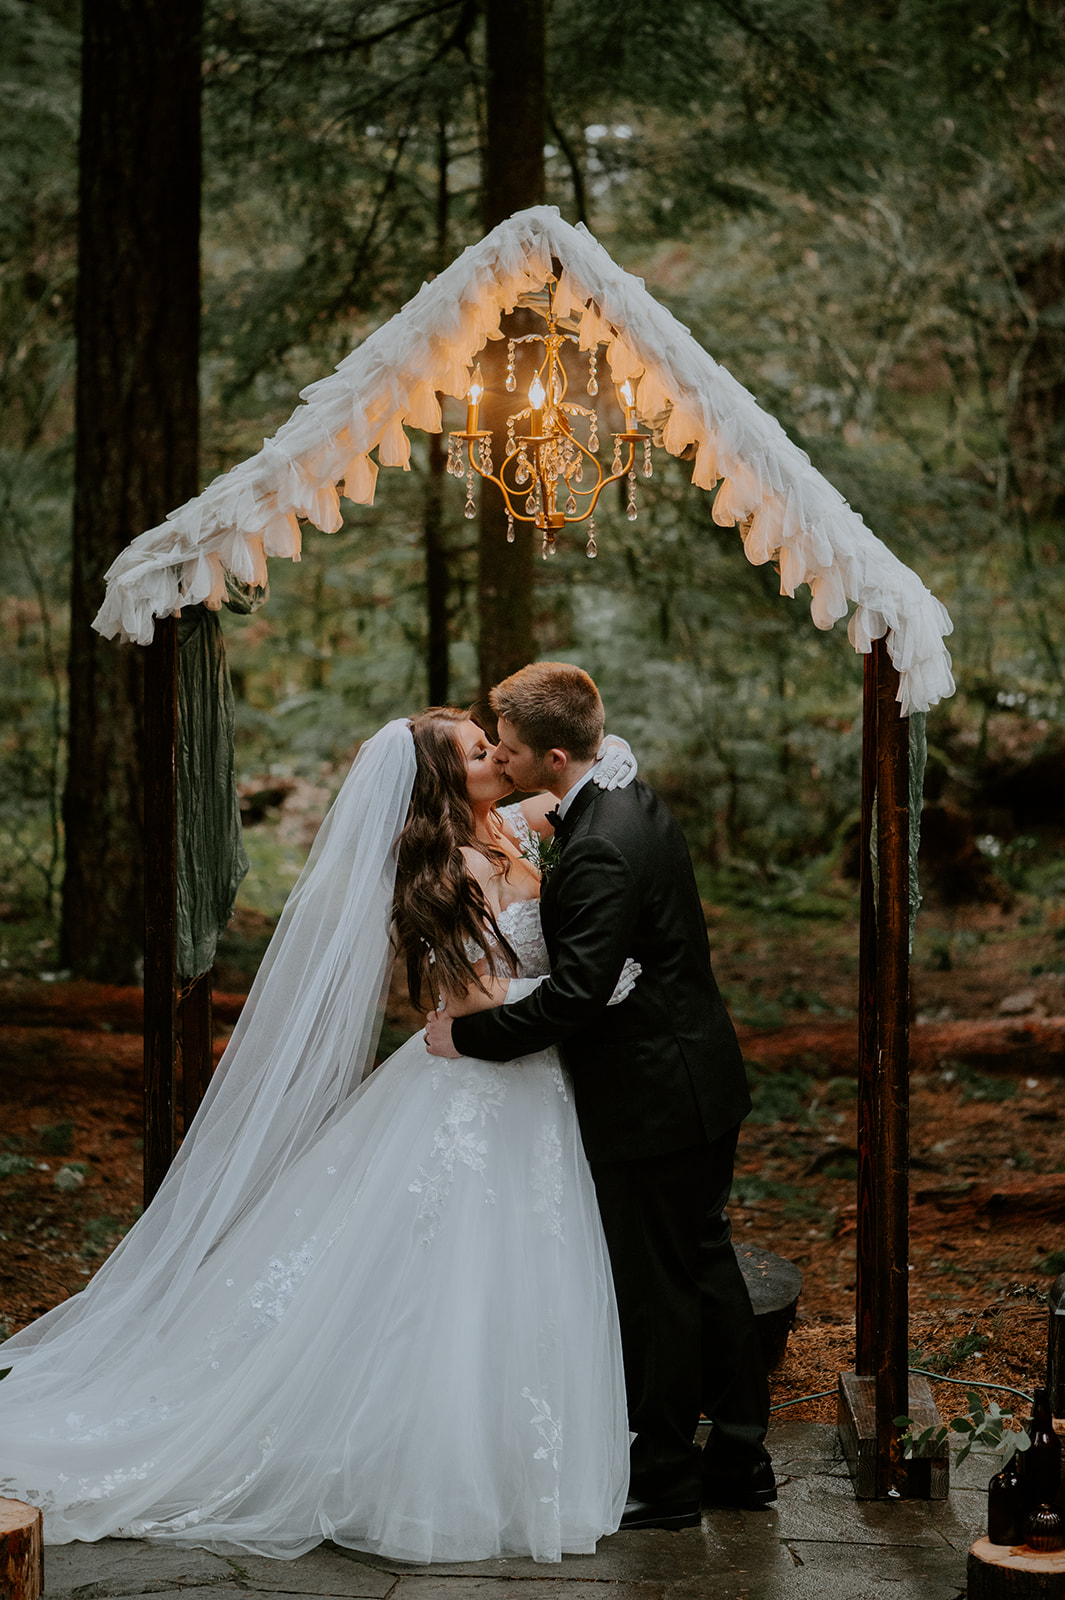 Bride and groom kissing under their DIY wedding alter with a chandelier at their intimate ceremony in Oregon woods